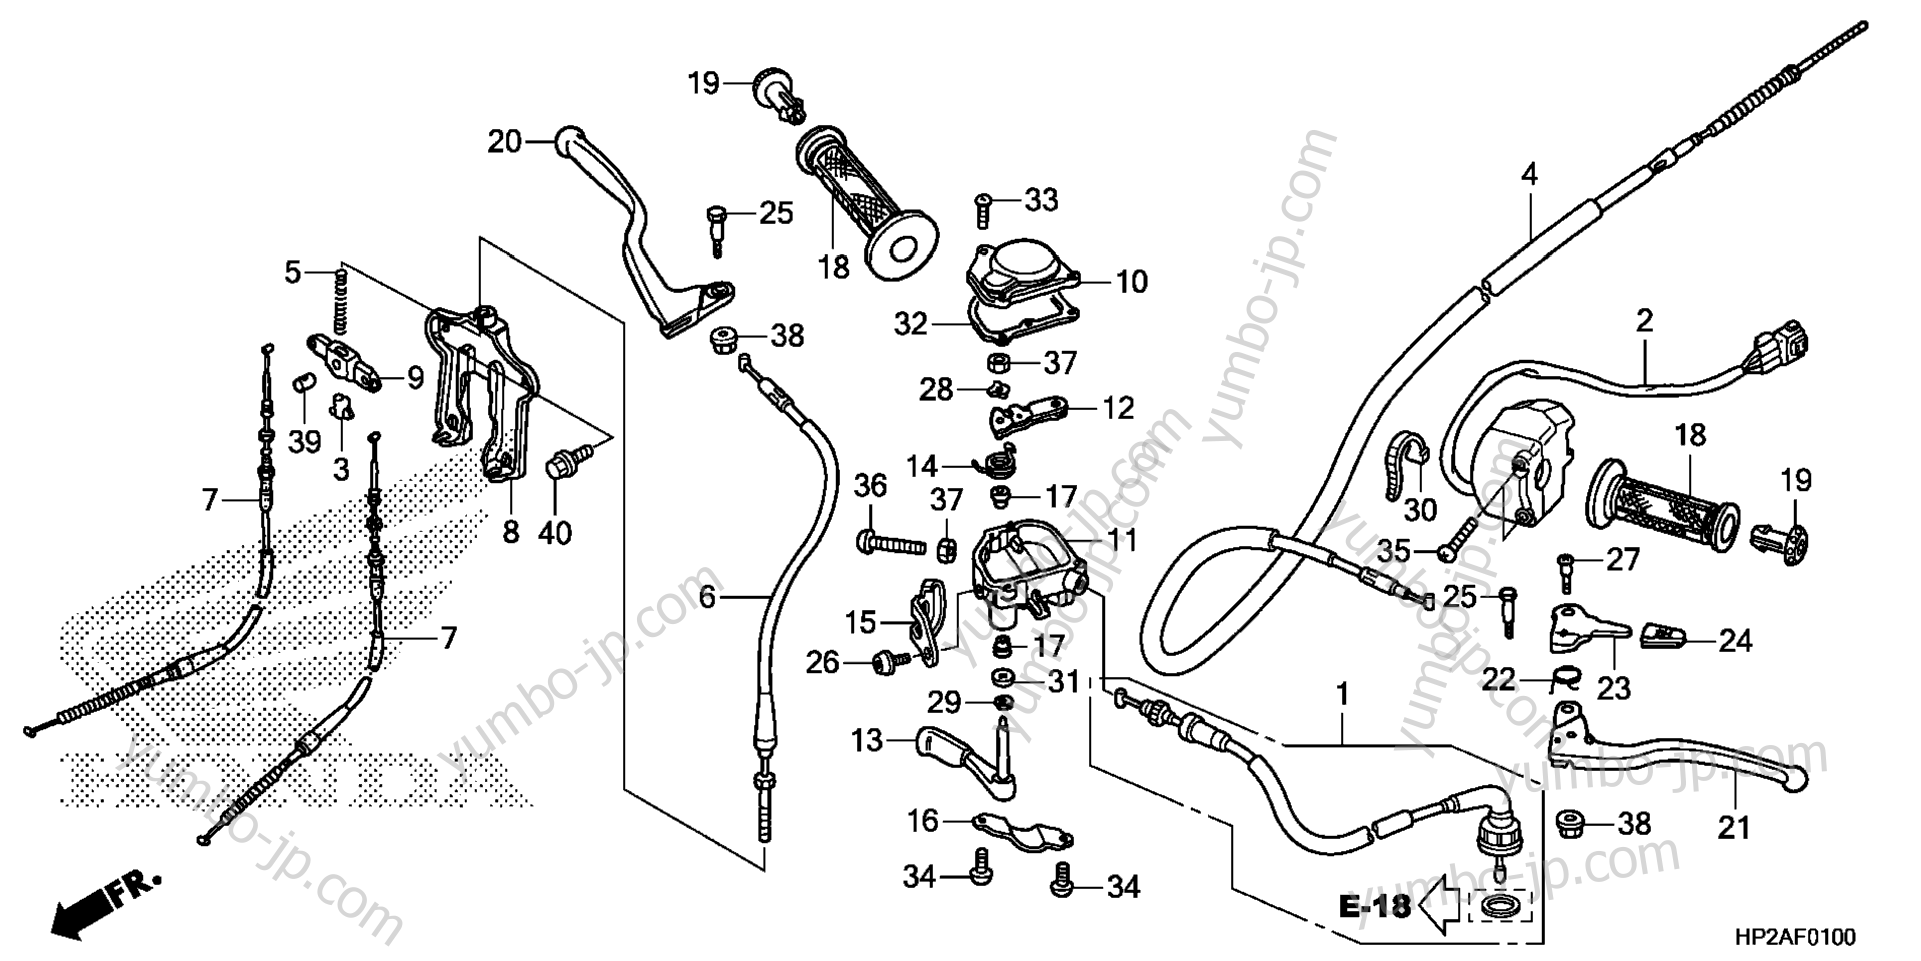 HANDLE LEVER / SWITCH / CABLE for ATVs HONDA TRX90X AC 2015 year